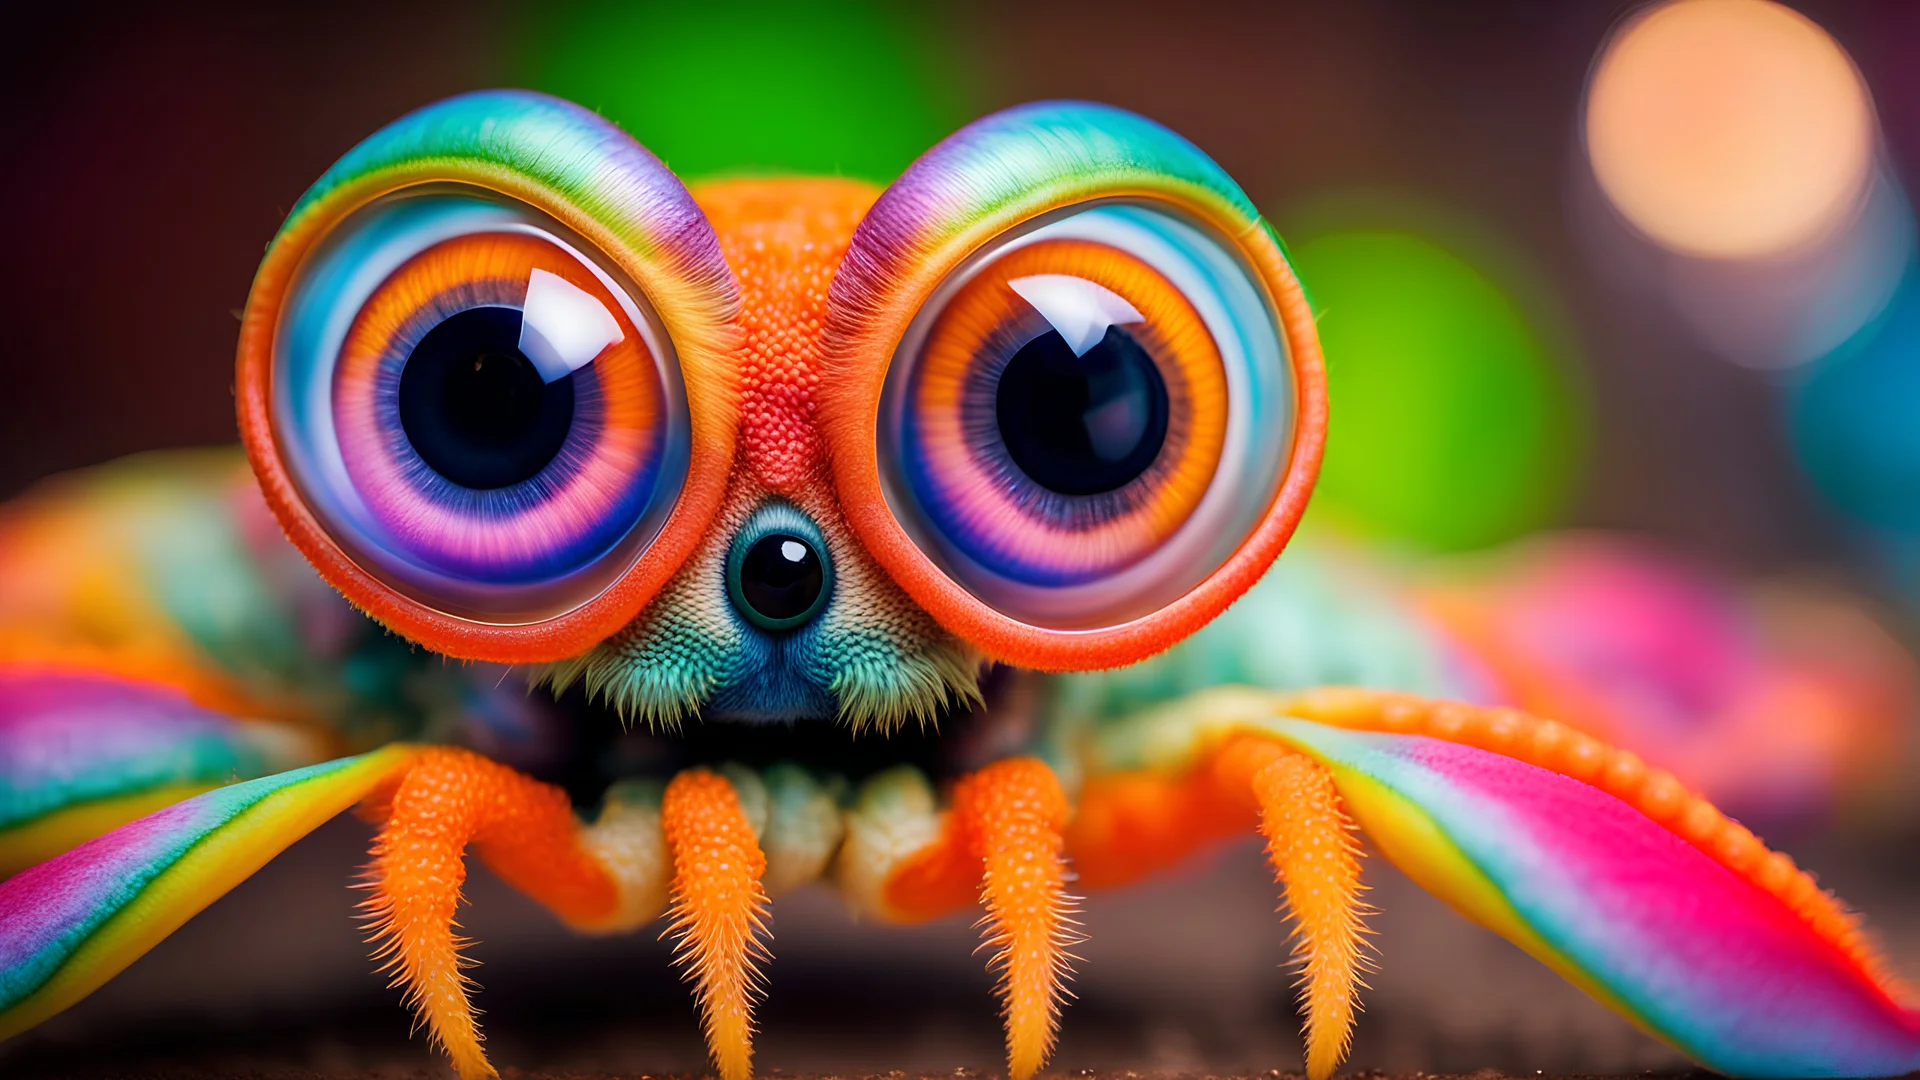 A middle size, jelly-like big eyes-on-stalks, fatt body colorful pastel patterned skin alien creature tanding a floor, full body, high detailed, high textured, sharp focus, deep colors, Professional photography, bokeh, natural lighting, canon lens, shot on dslr 64 megapixels , blur background with neon light, office